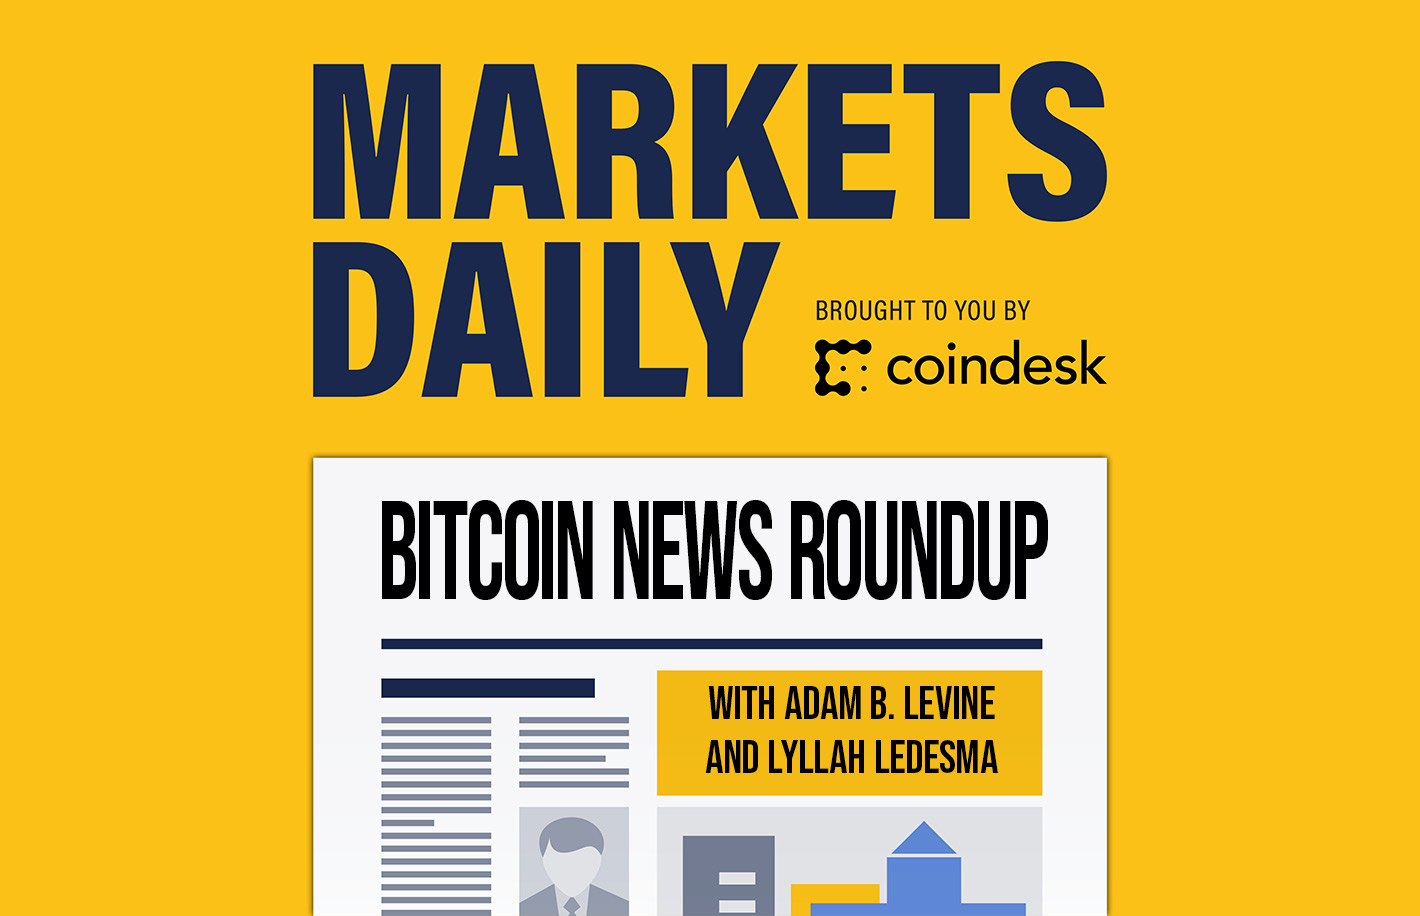 Bitcoin News Roundup for July 30, 2020